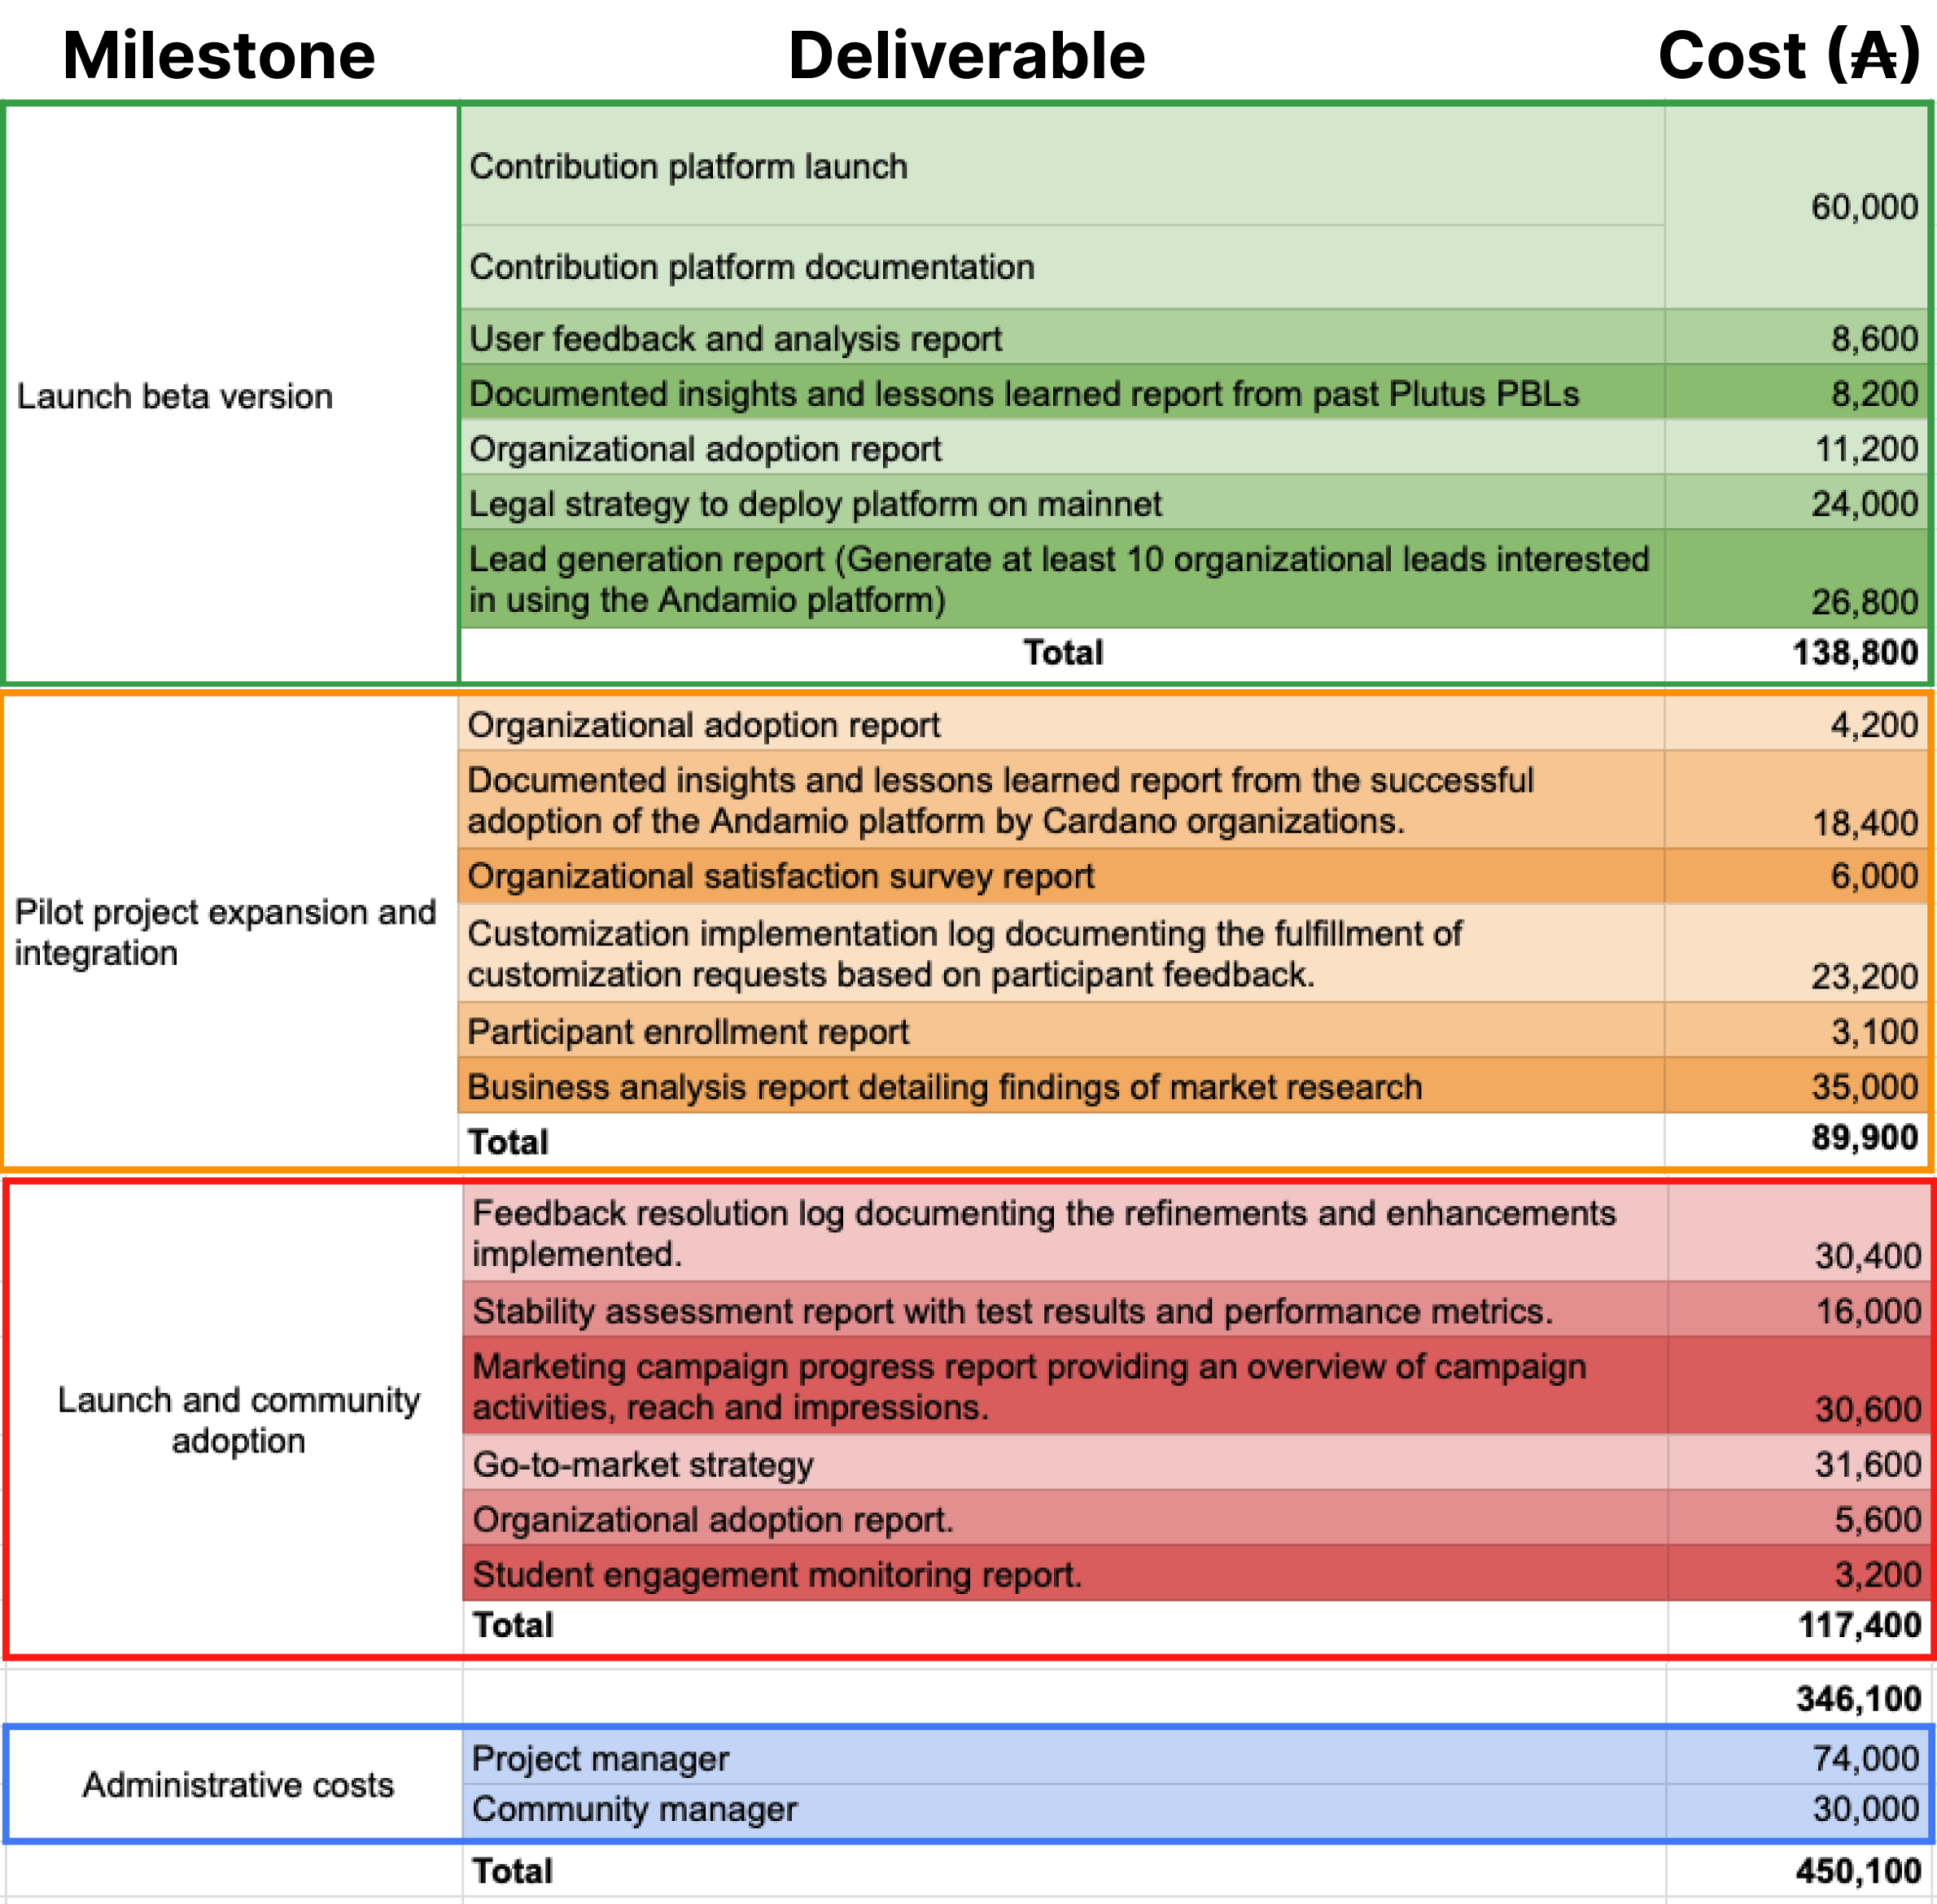 Milestones, deliverables and costs